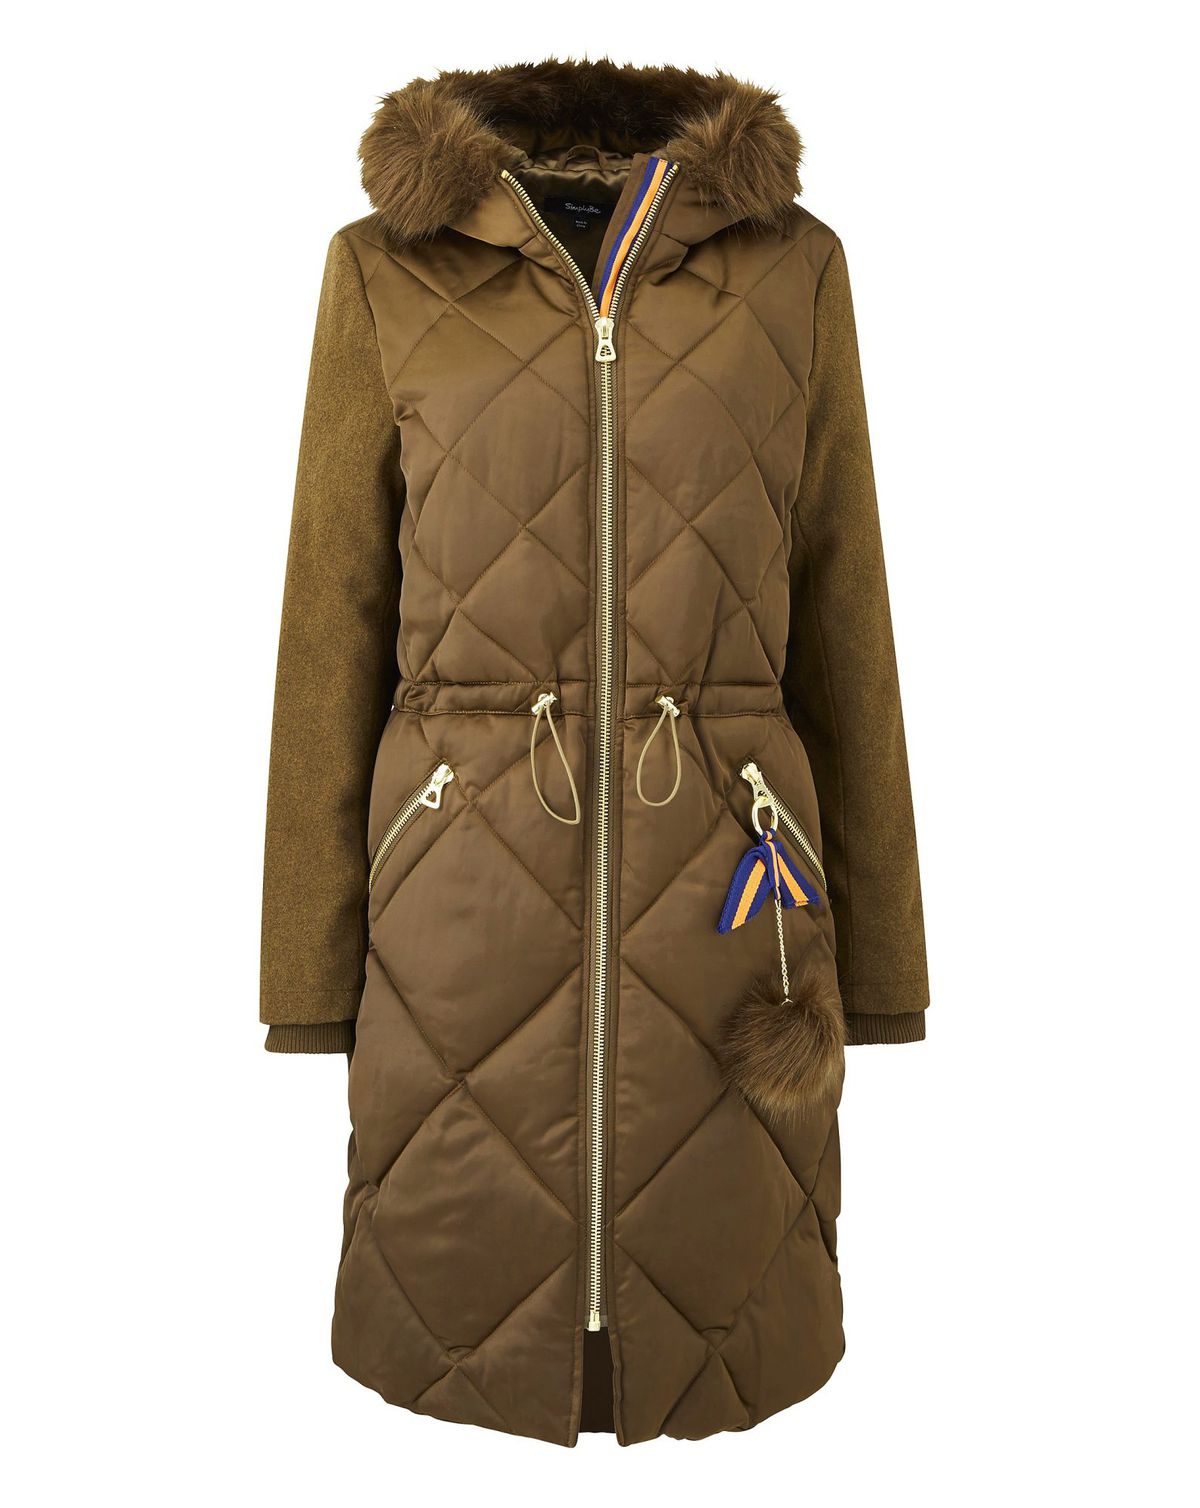 a puffer that is just as stylish as it is warm by Simply Be